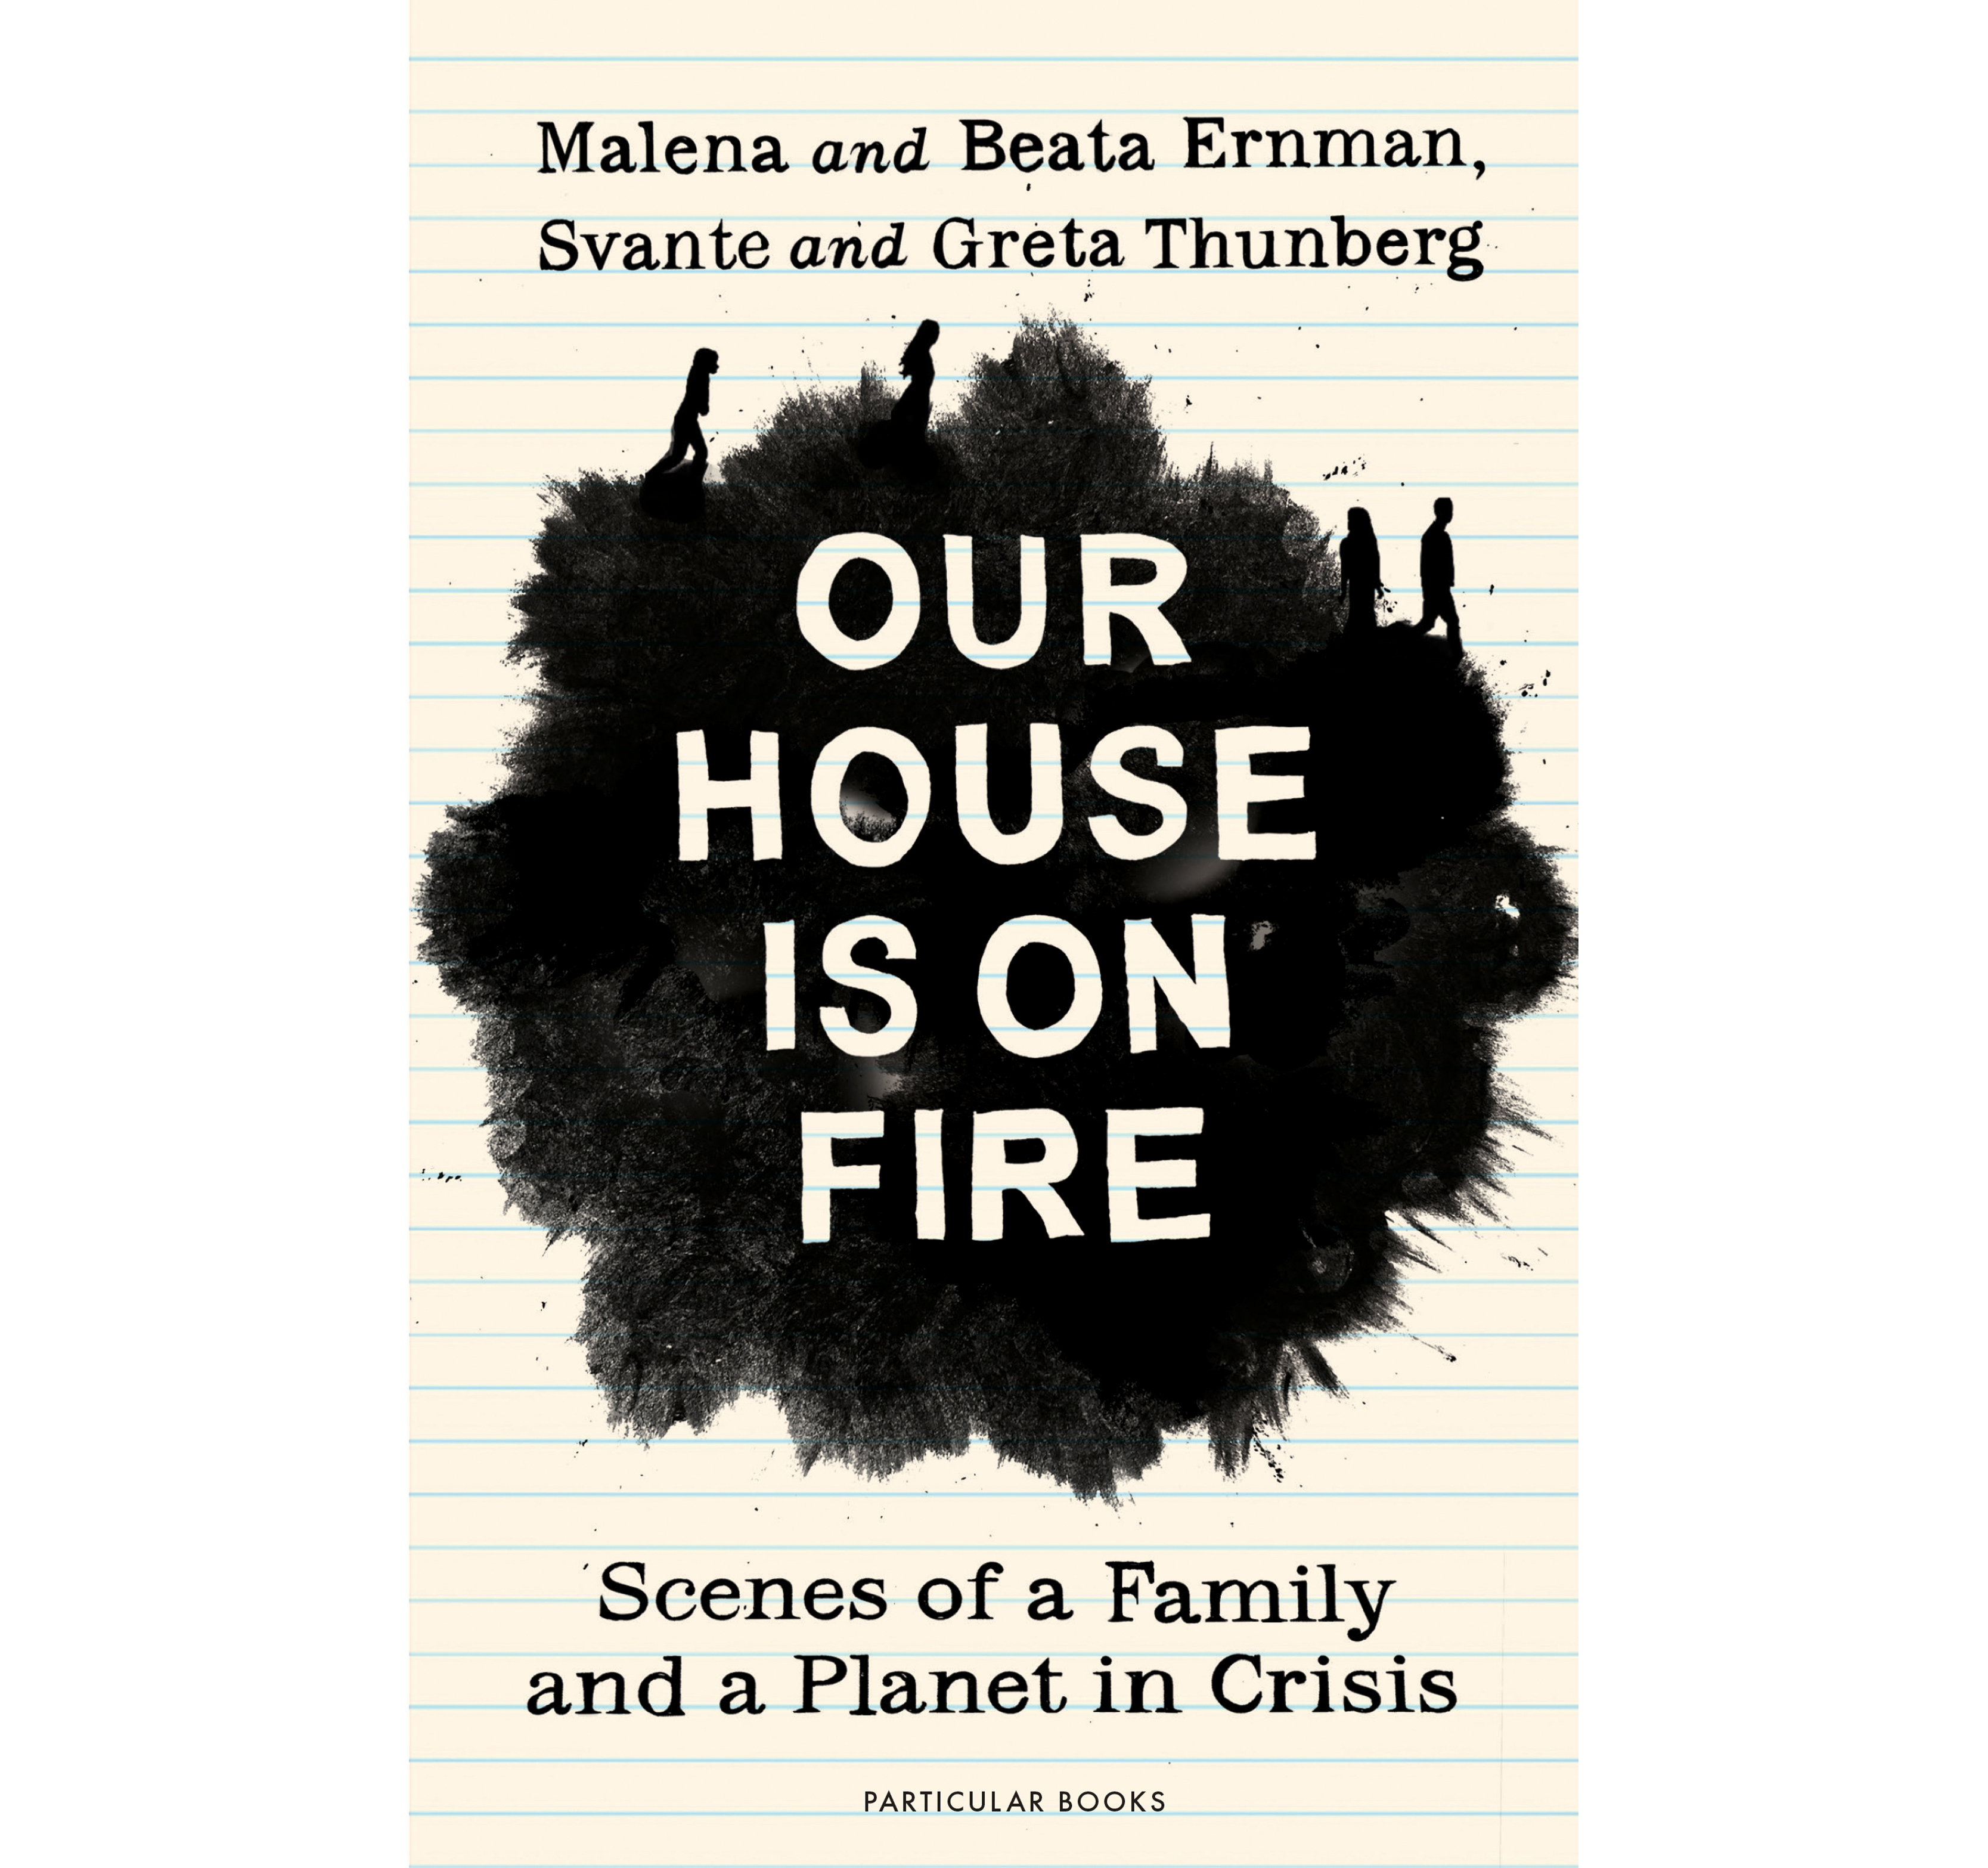 Our House Is On Fire: Scenes of a Family and a Planet in Crisis by Malena and Beata Ernman, Svante and Greta Thunberg (Particular Books/PA)